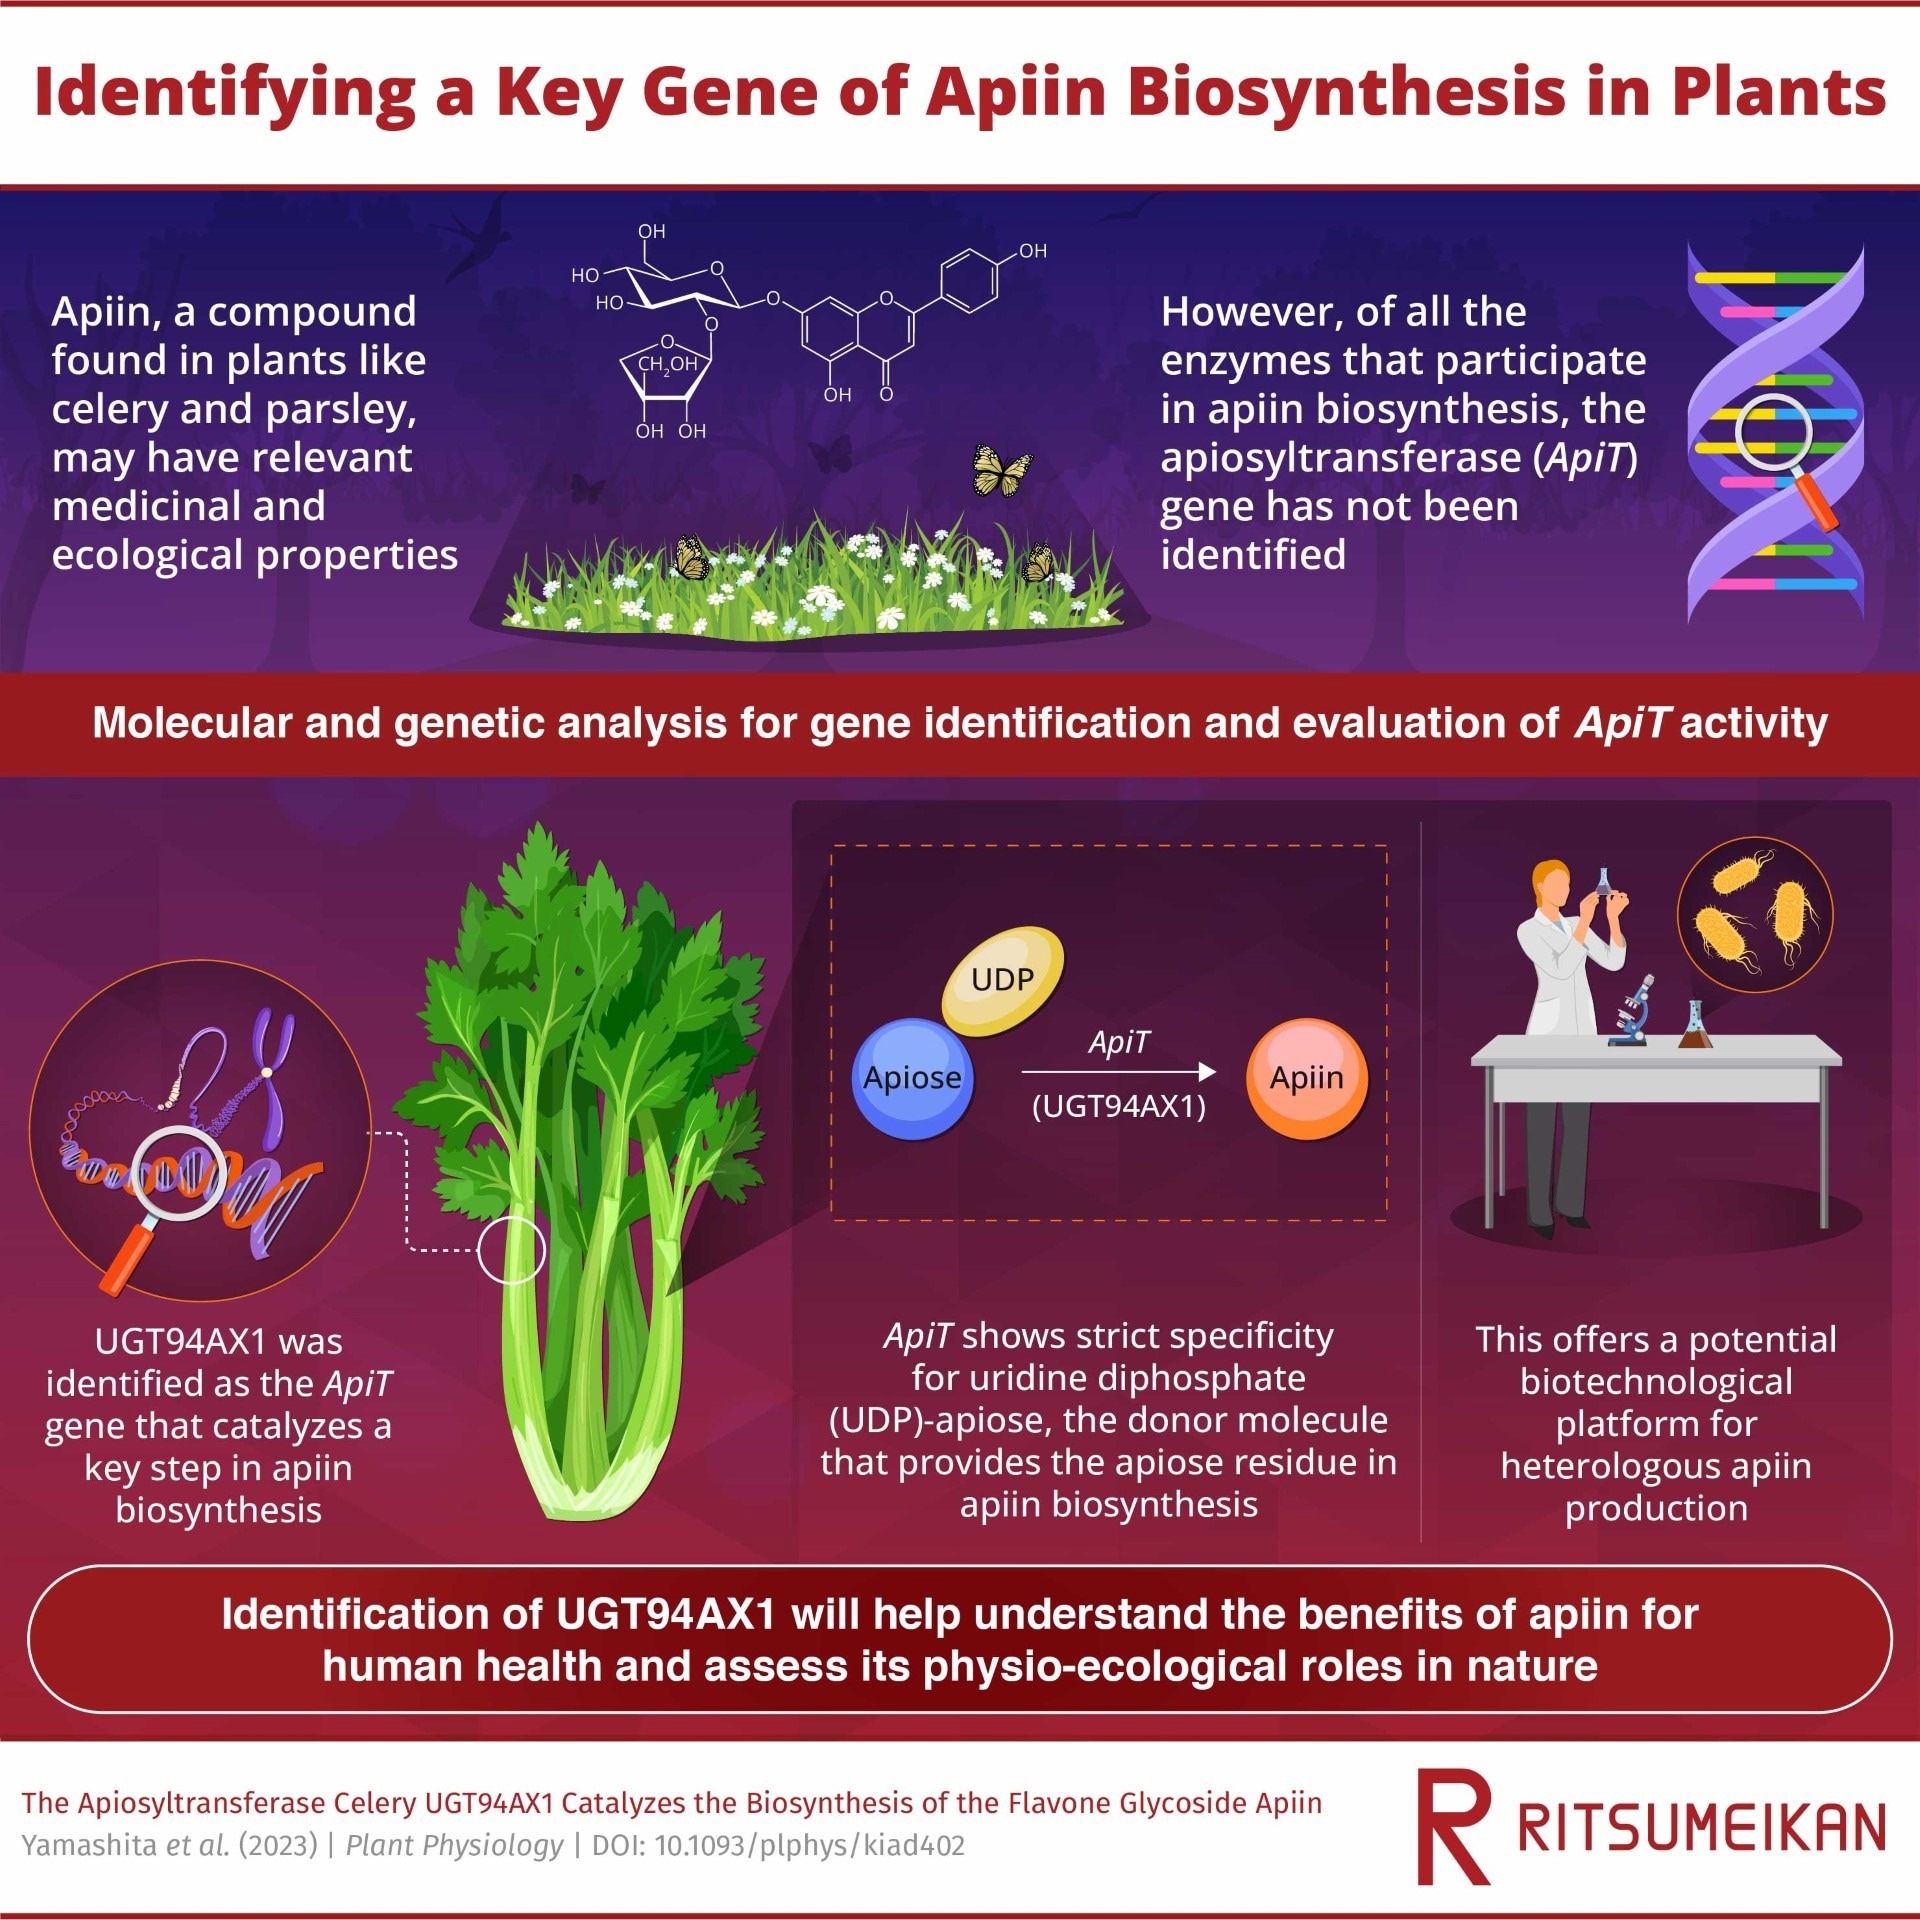 A Newly Discovered Plant Gene that Helps Make Apiin: The Search Ends Here